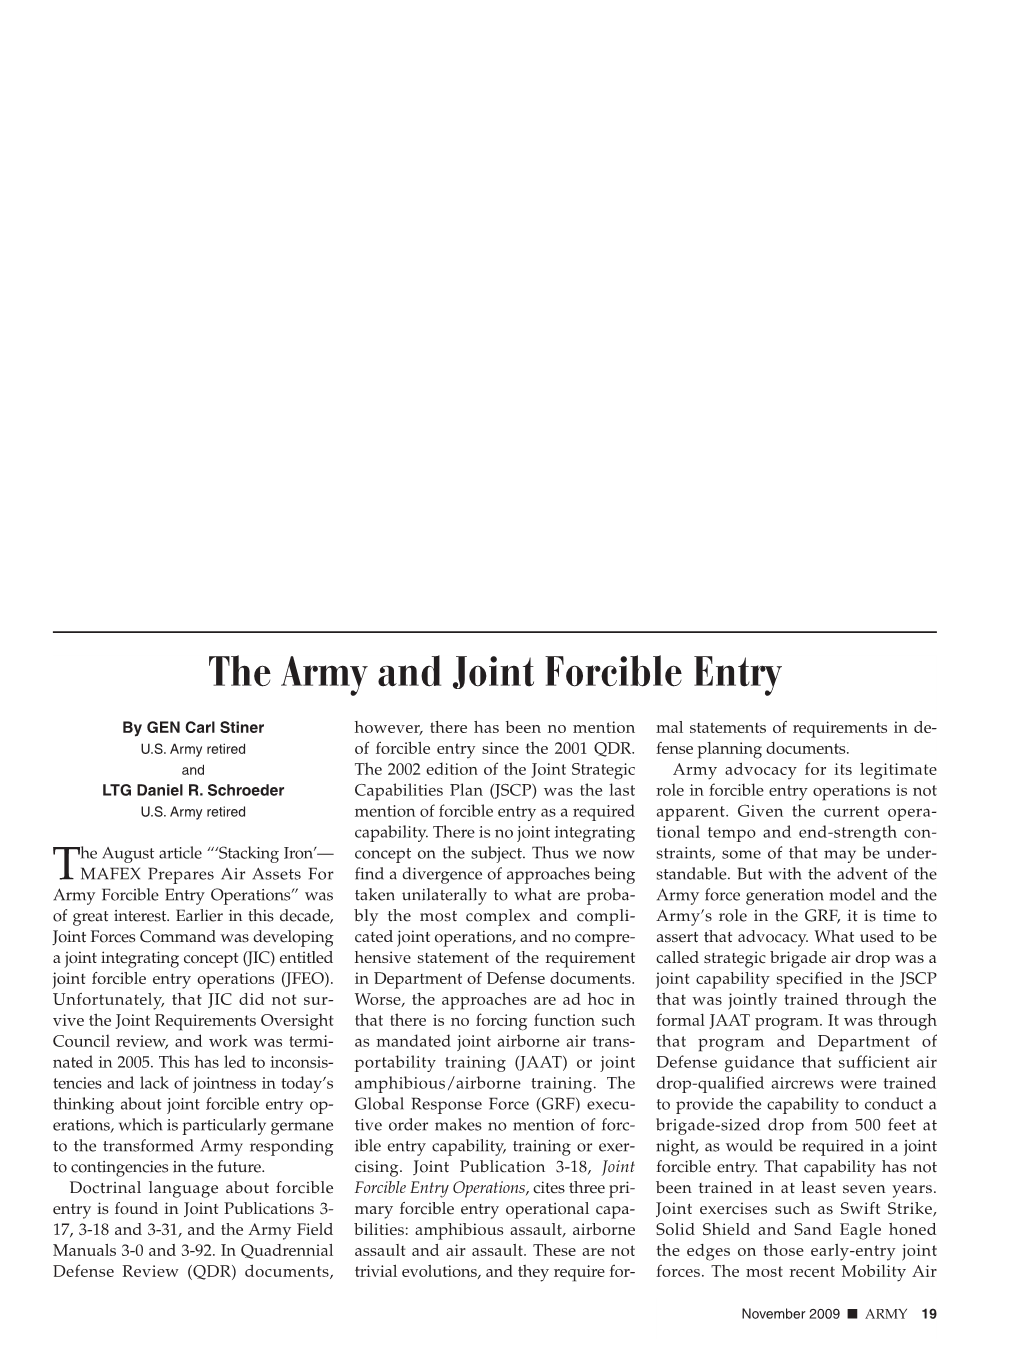 The Army and Joint Forcible Entry